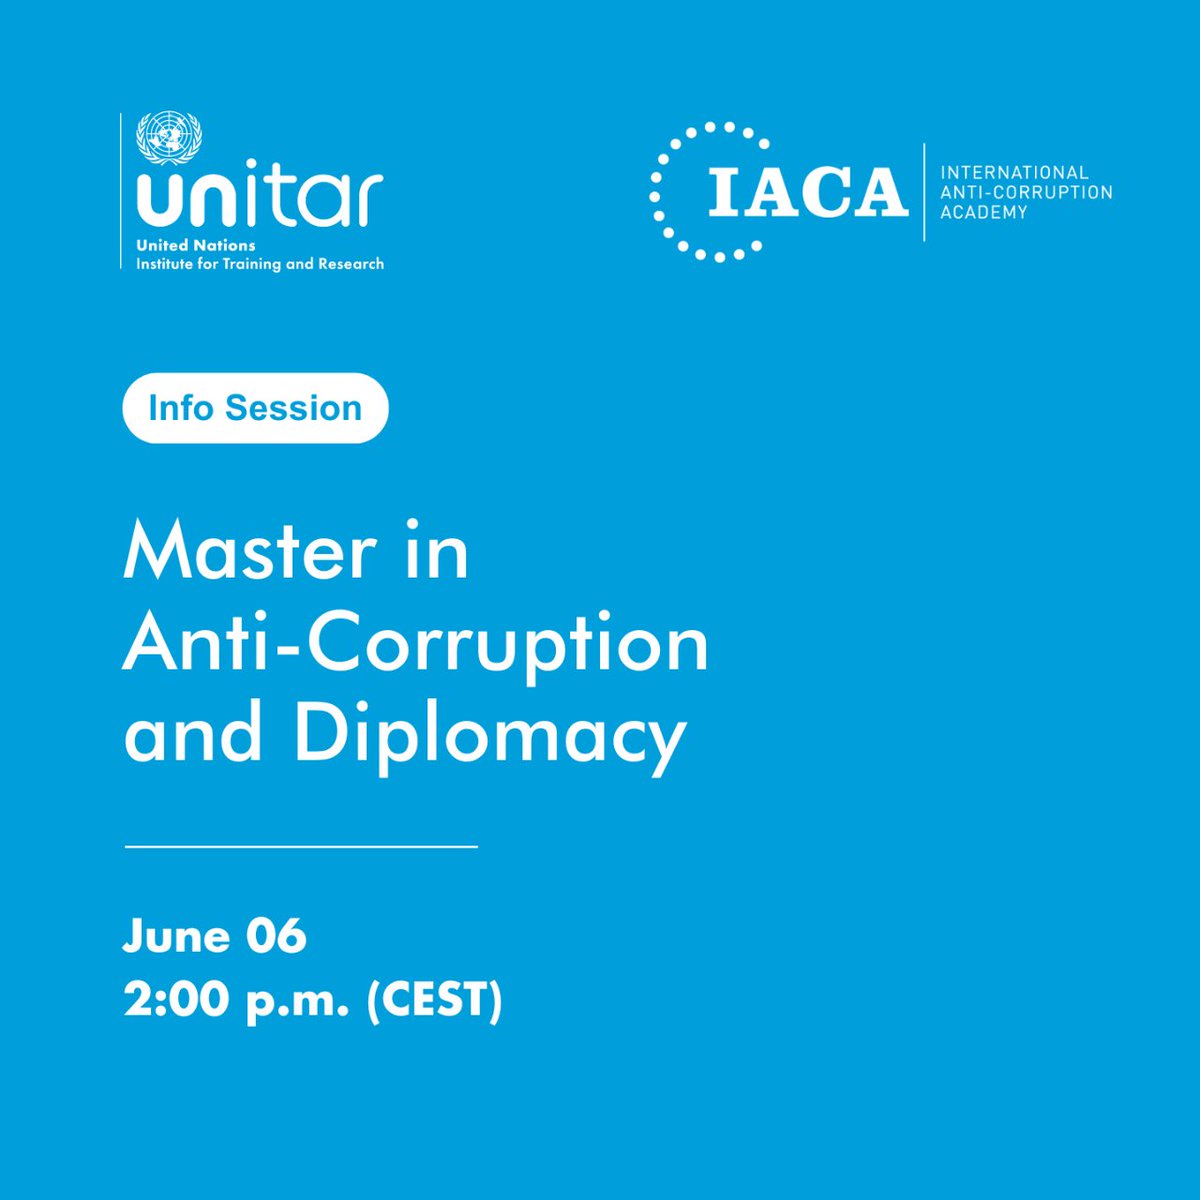 Join our upcoming interactive Q&A session on the “Master in Anti-Corruption and Diplomacy' in partnership with @IACA_Academy. A panel of course administrators will provide programme details & answer any questions you have about the programme. To register: unitar.zoom.us/webinar/regist…